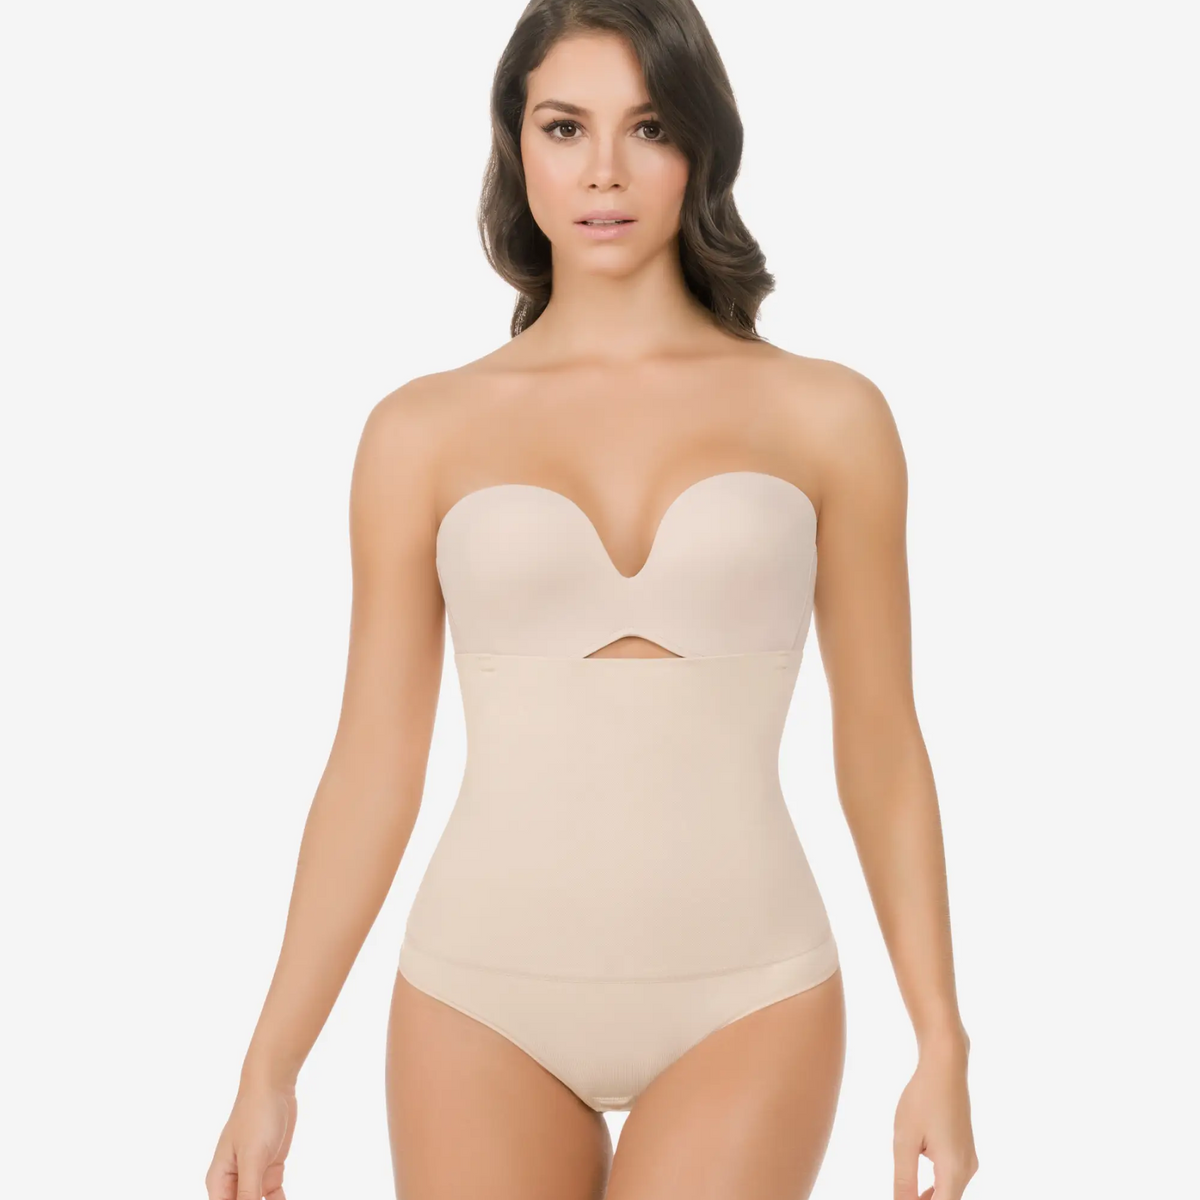 Enhance Curves with Mid-Thigh Strapless Shaper